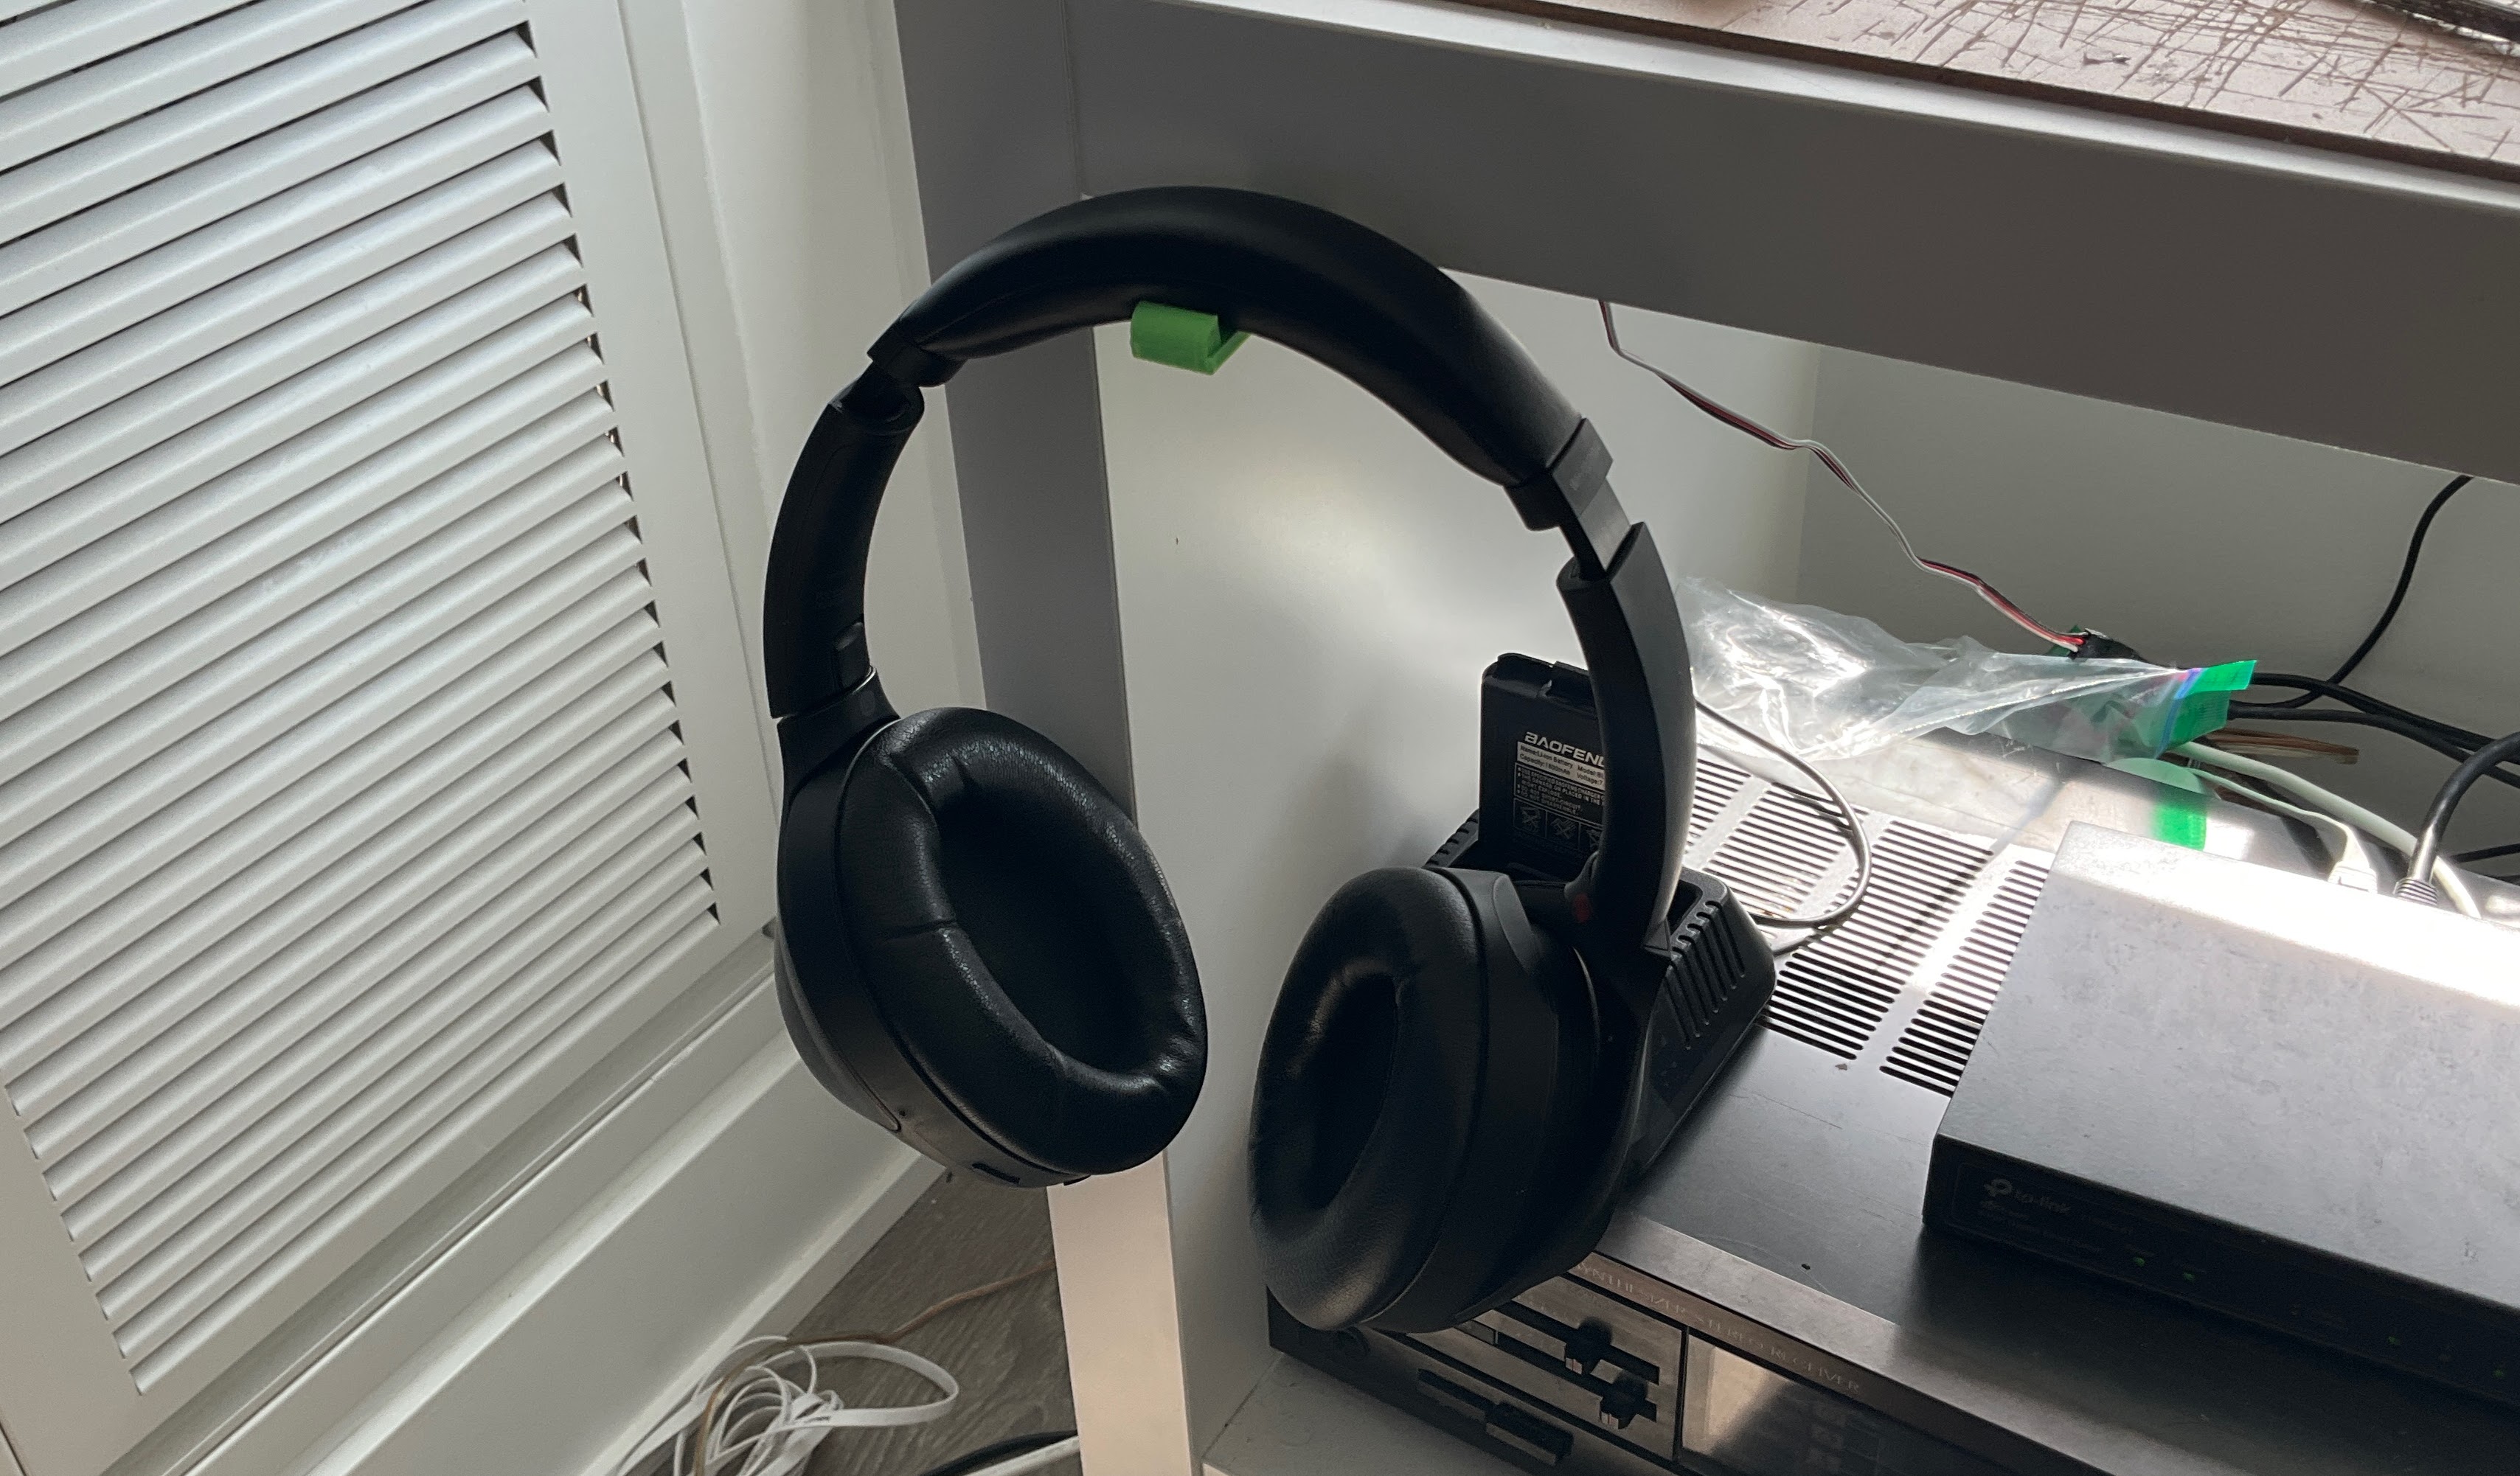 A photo of the headphone holder